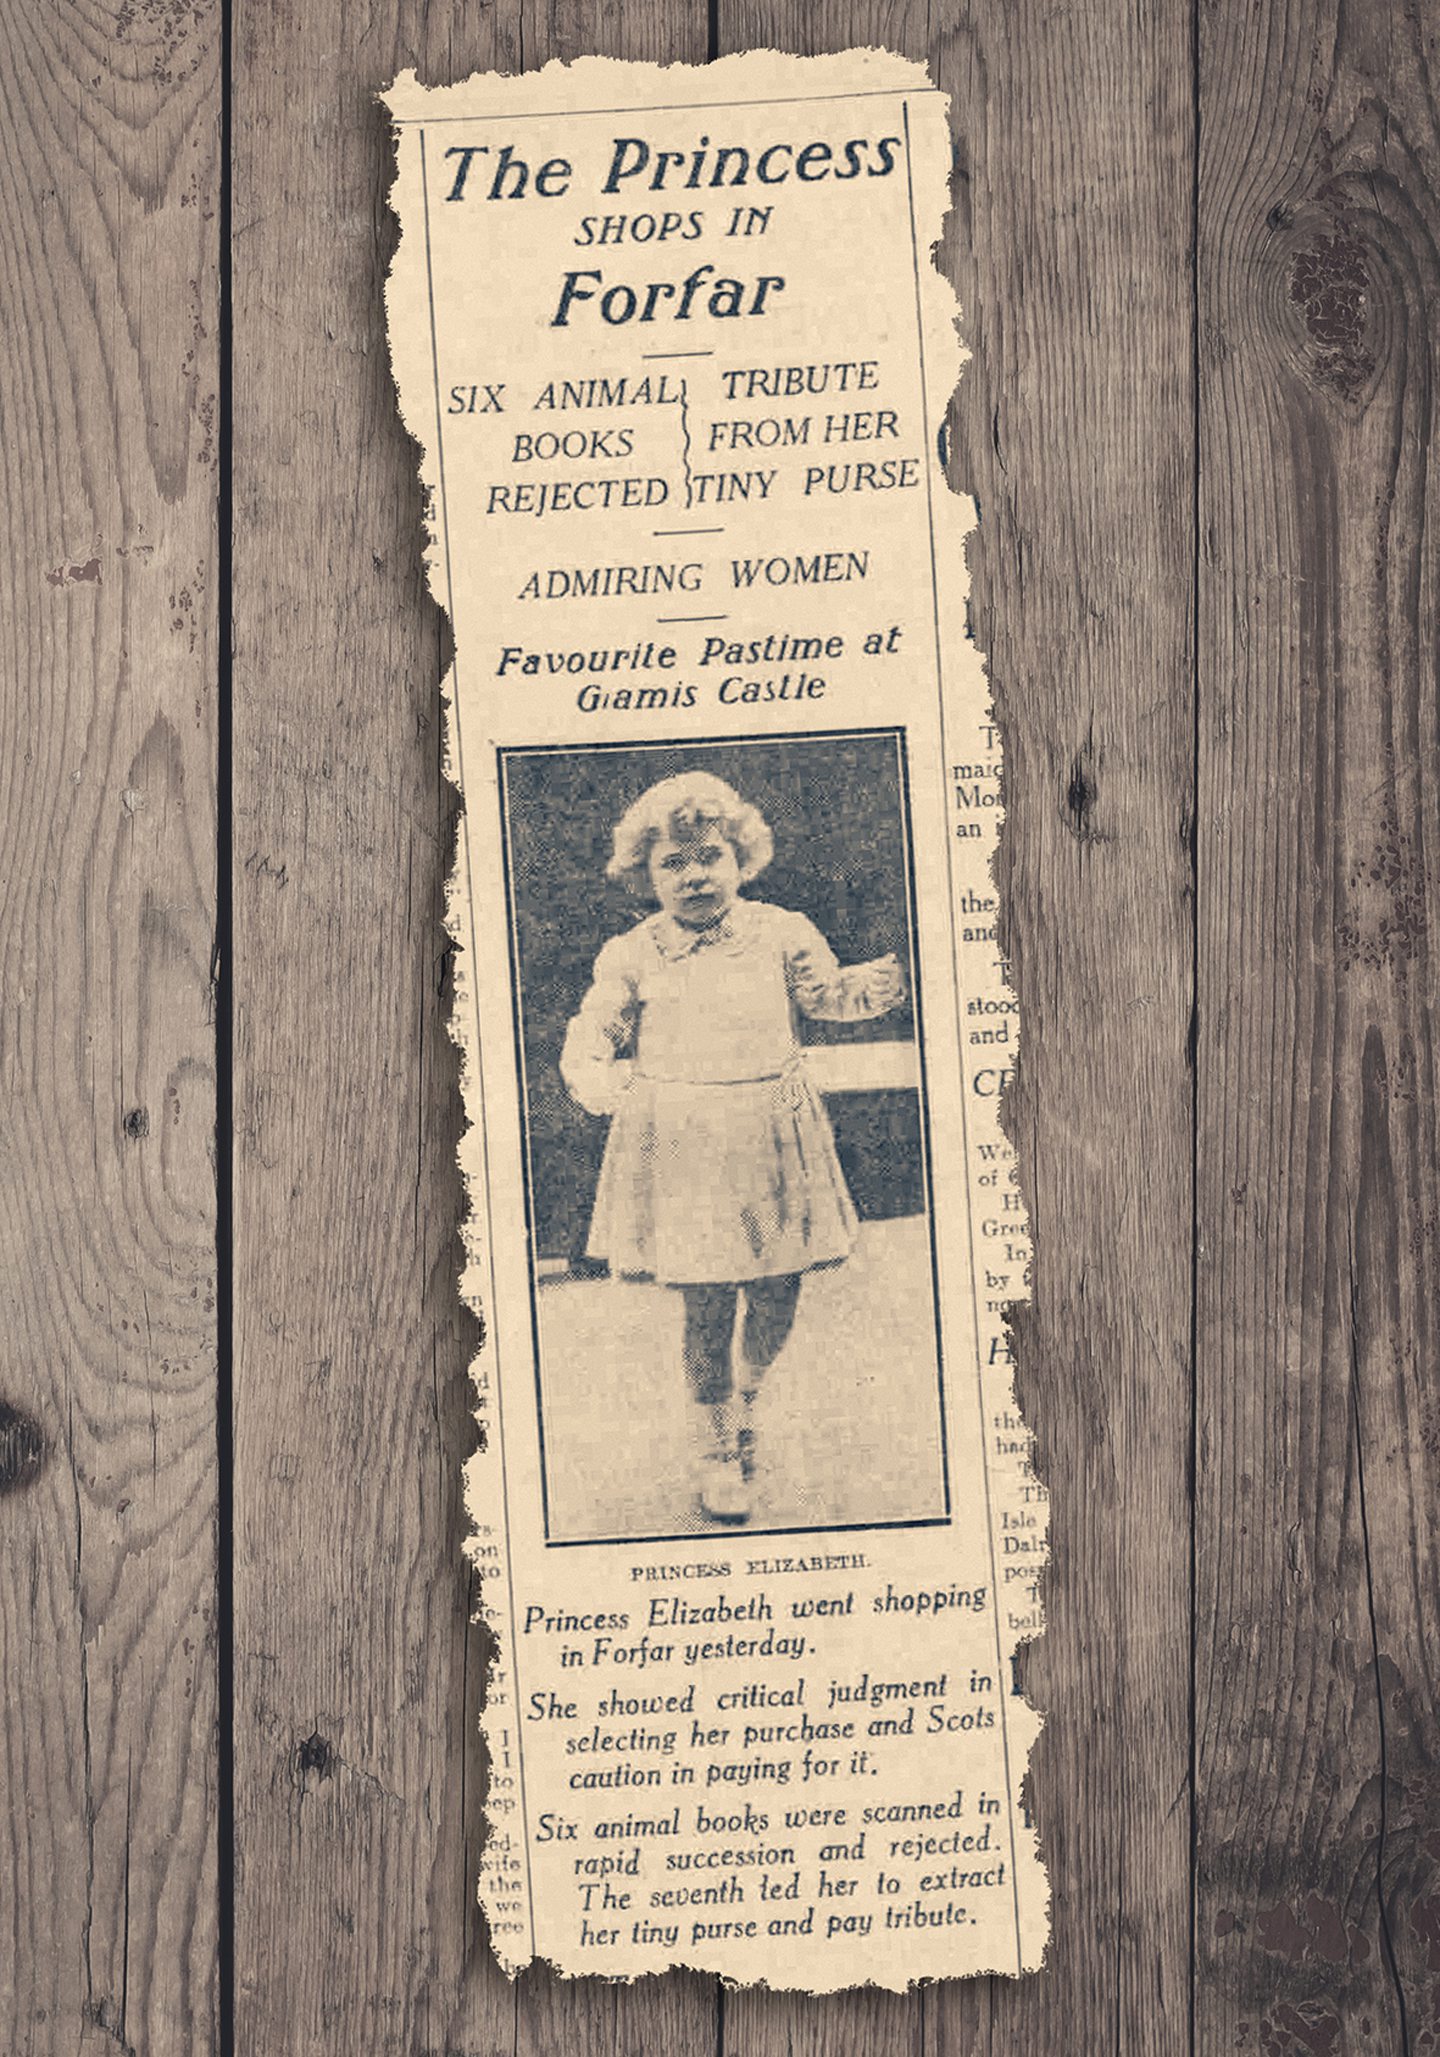 Princess Elizabeth's shopping trip made the headlines in 1930.